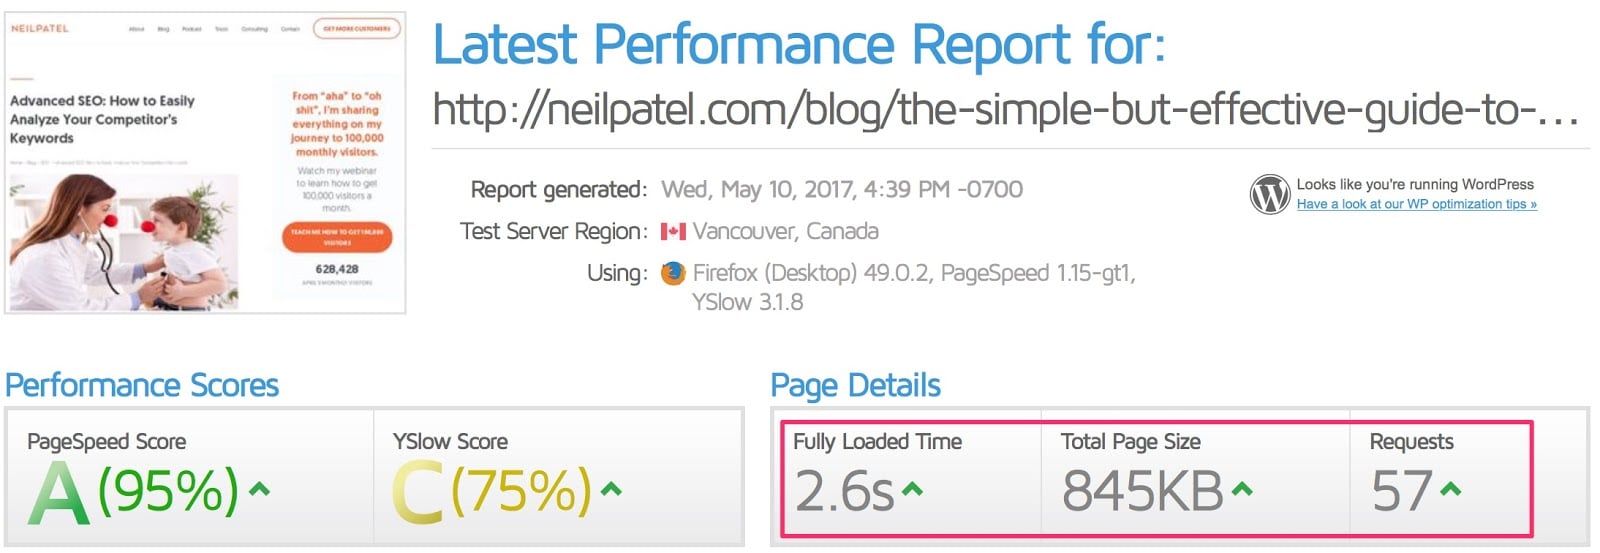 Latest Performance Report for http neilpatel com blog the simple but effective guide to keyword competition analysis GTmetrix